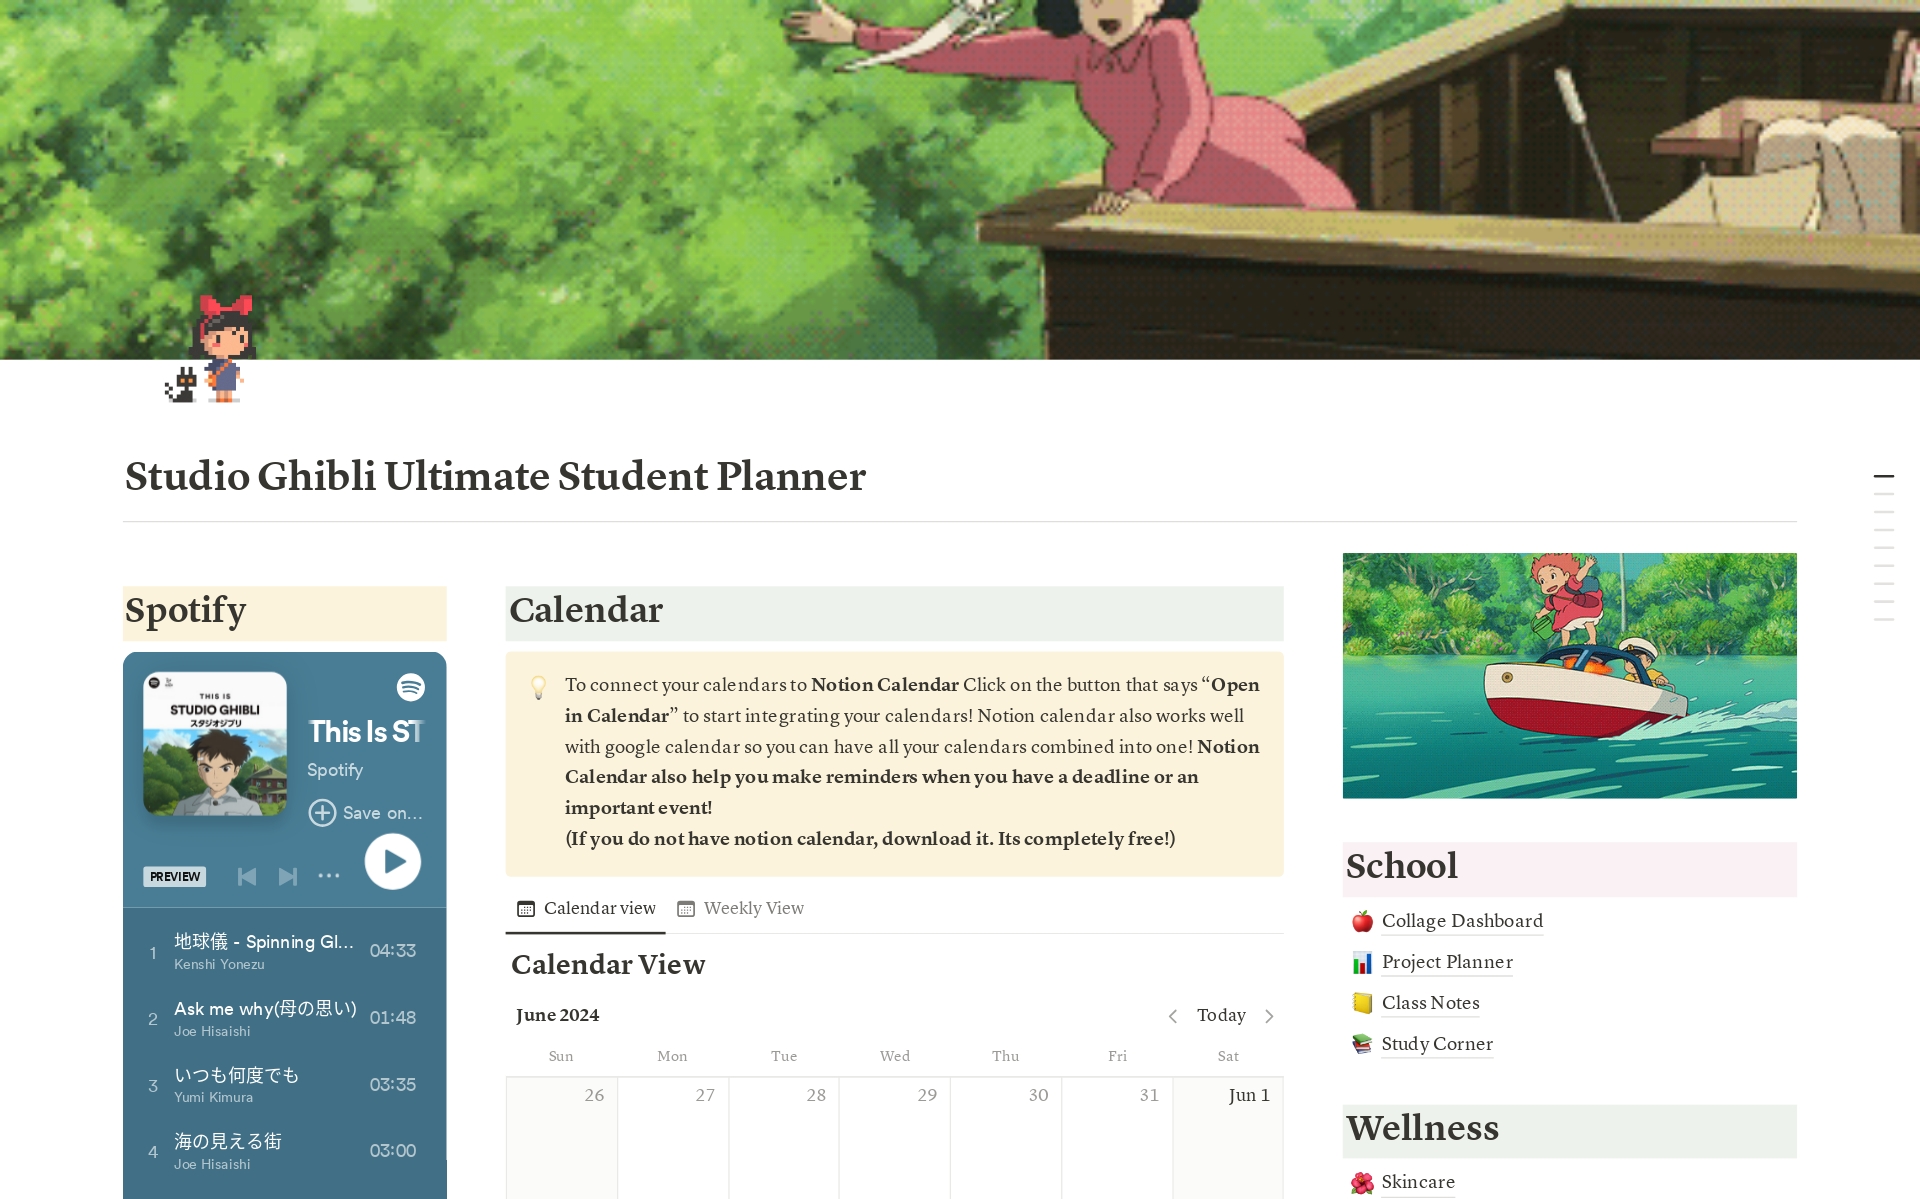  Inspired by Studio Ghibli, it includes: College Dashboard, Project Planner, Class Notes, Study Corner, Skincare Tracker, Mental Health Resources, Nutrition Log, Spotify Widget, Pomodoro Timer, Anime Watchlist, & More! Let Studio Ghibli charm guide your academic journey!